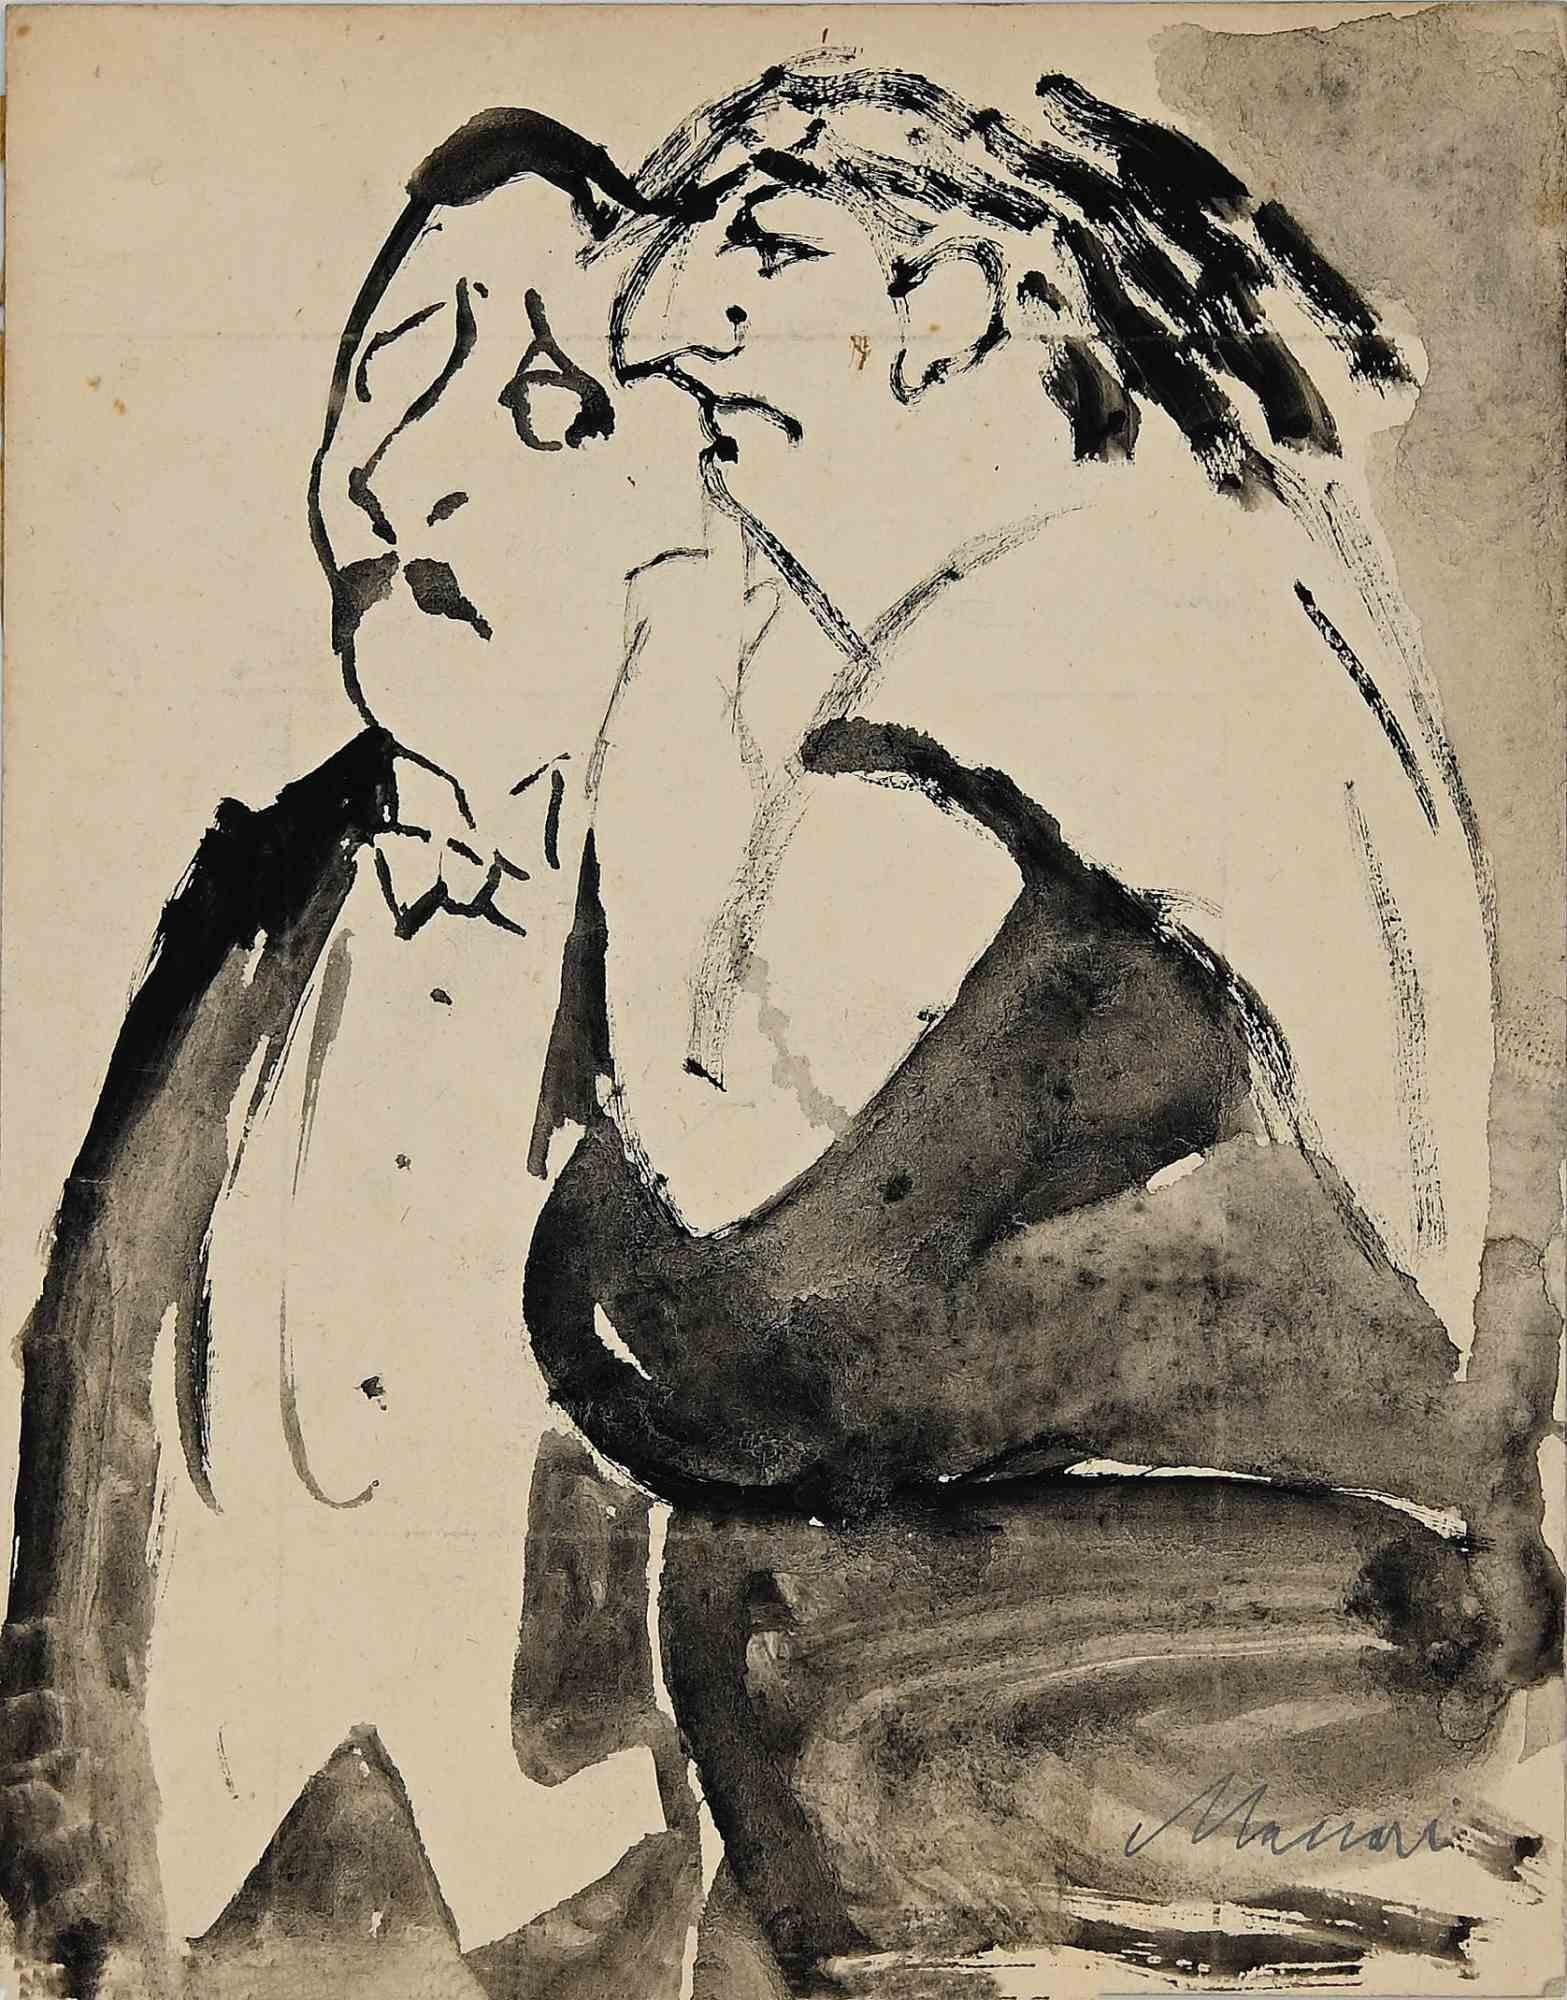 Couple at Party is a Watercolor Drawing realized by Mino Maccari  (1924-1989) in 1940s.

Hand-signed on the lower margin.

Good condition on a little paper.

Mino Maccari (Siena, 1924-Rome, June 16, 1989) was an Italian writer, painter, engraver and